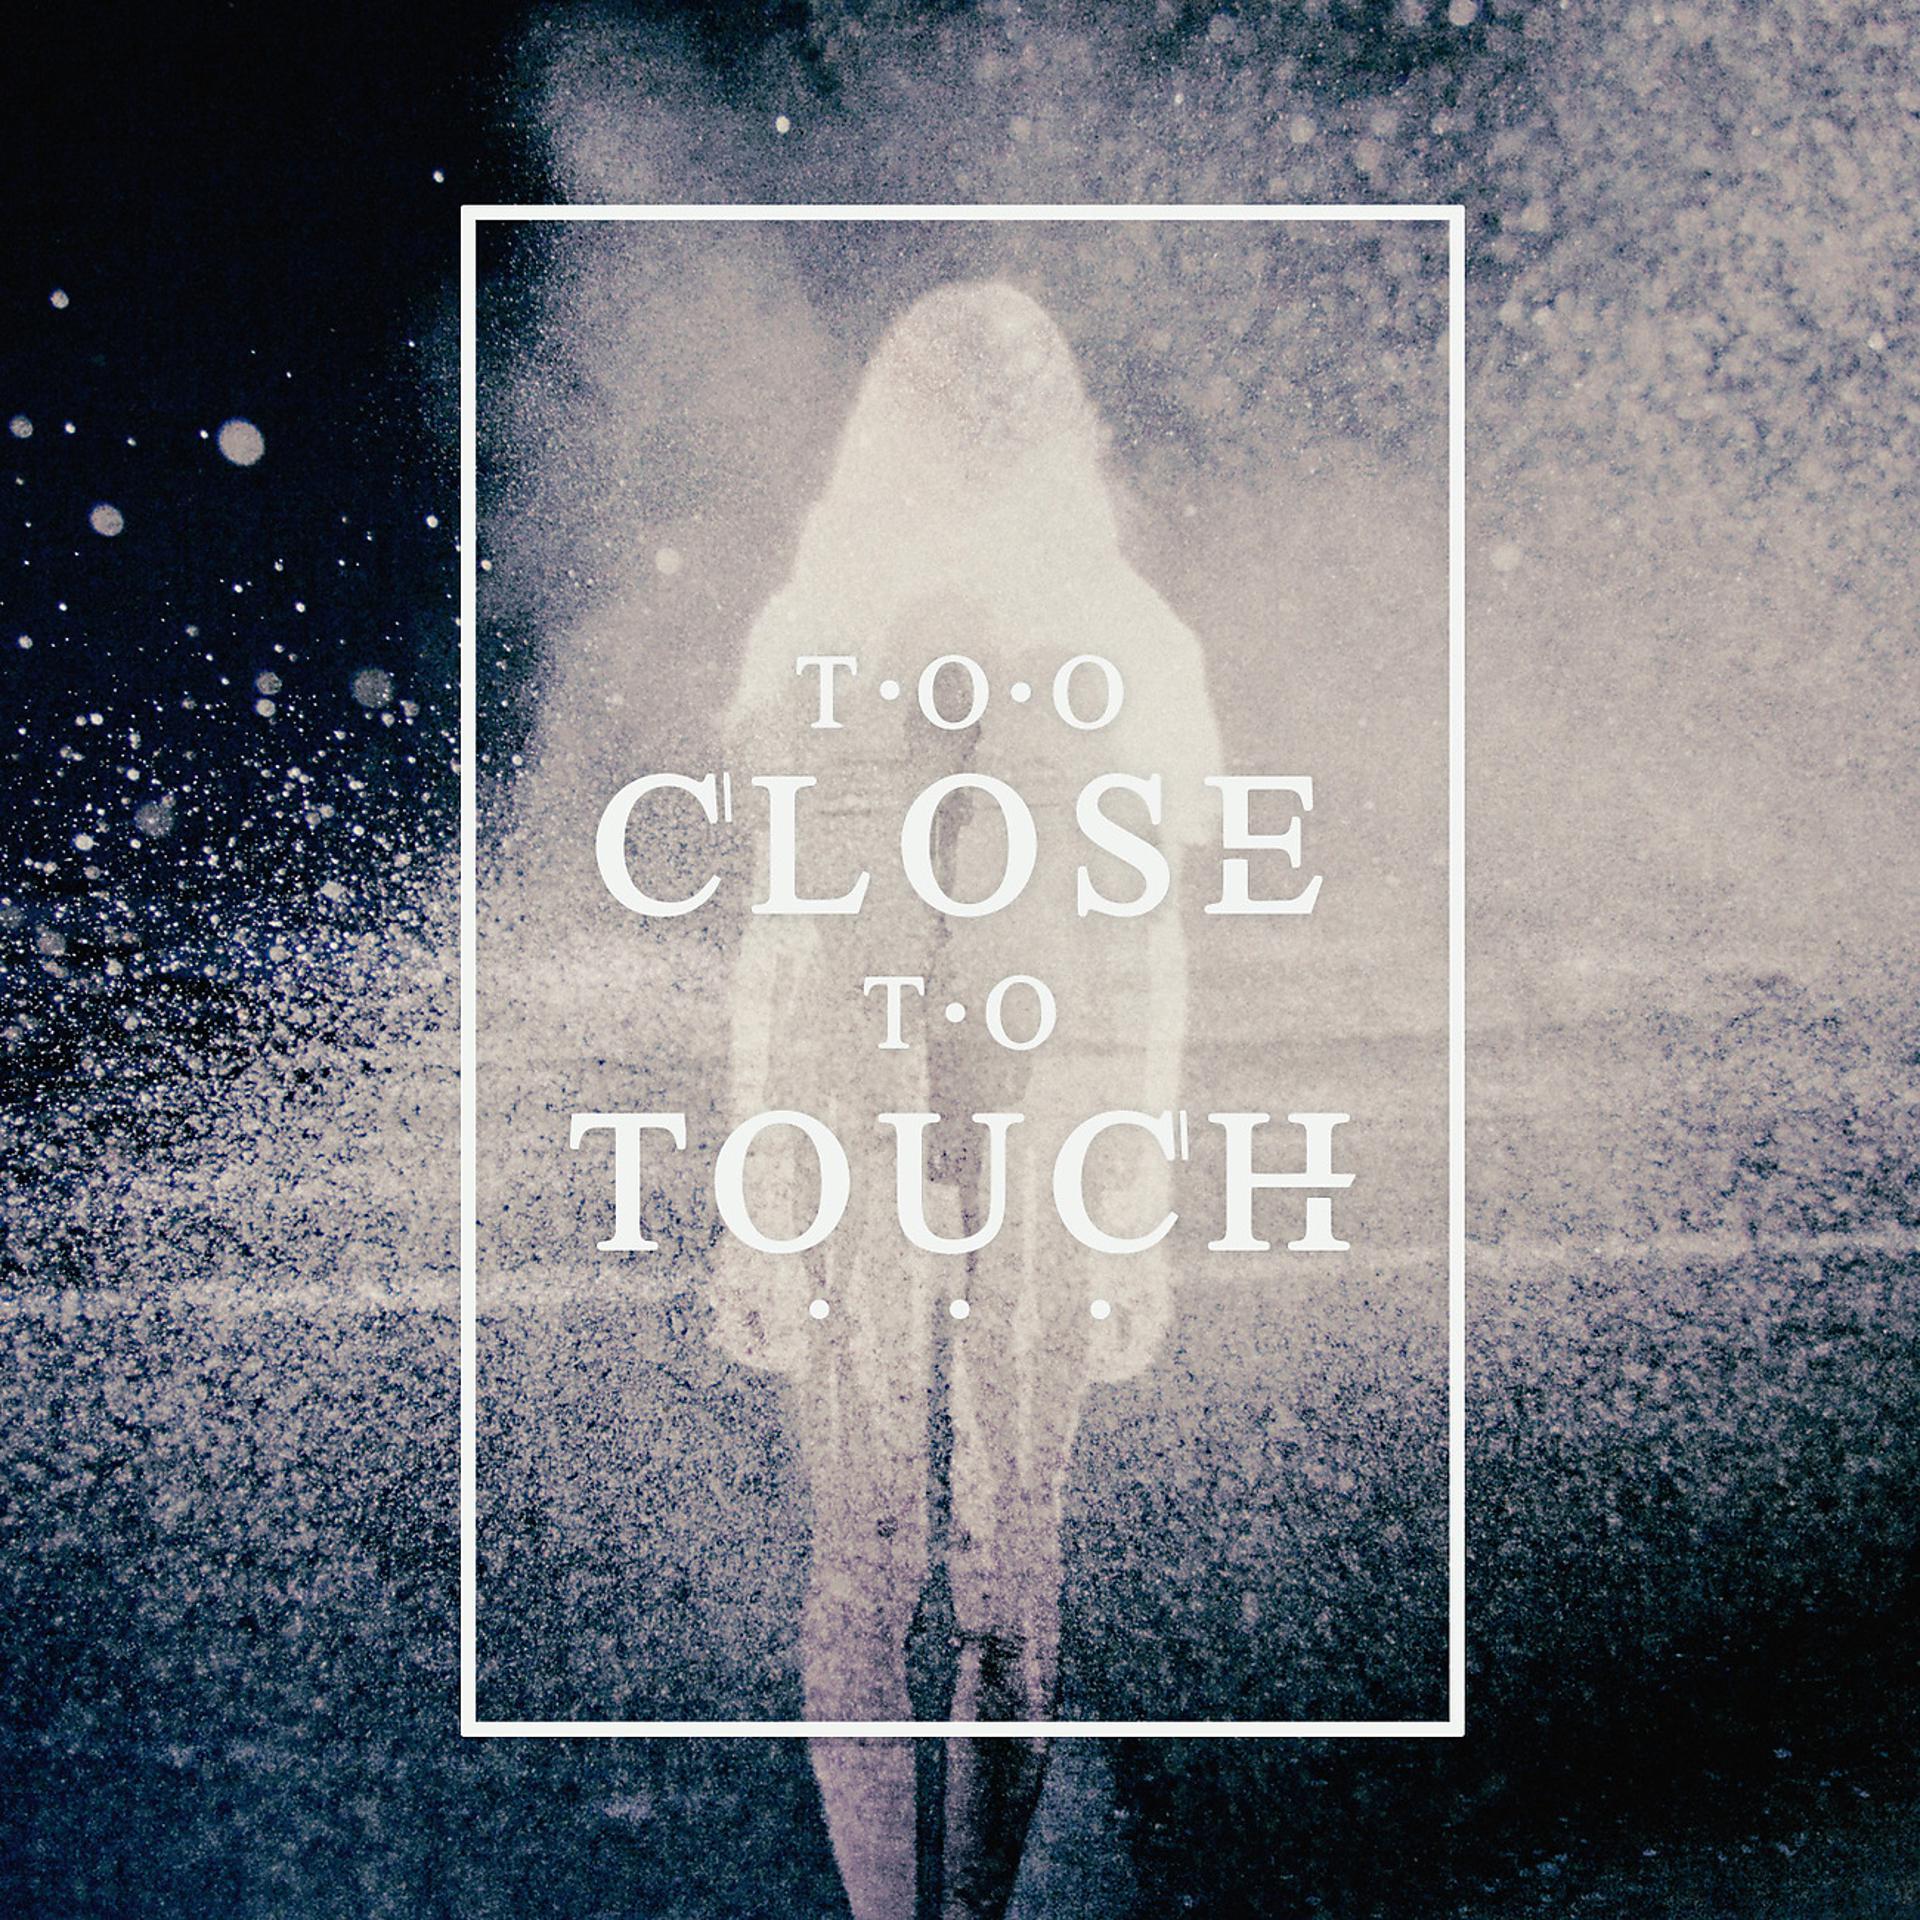 I m closer to you. Too close to Touch. Too close to Touch album. Too close to Touch Sympathy. Китон Пирс too close to Touch.